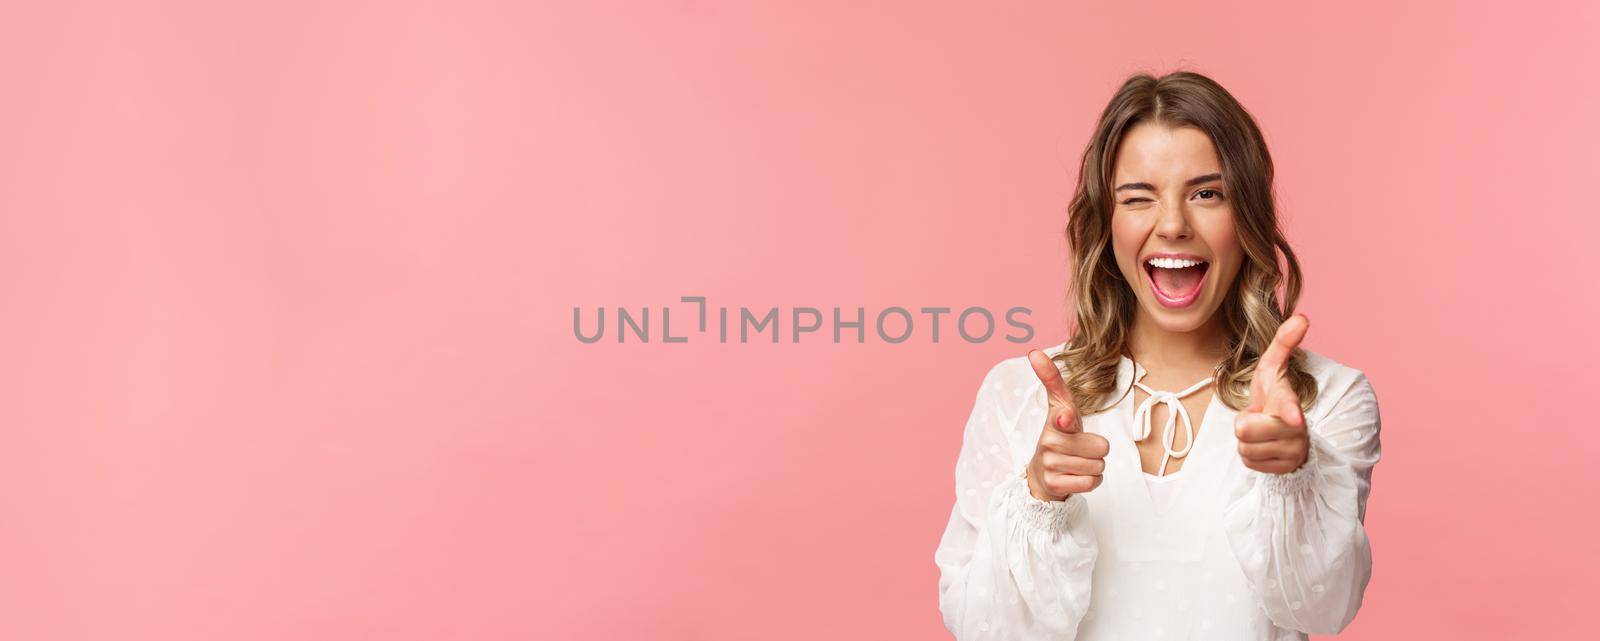 Close-up portrait of sassy and carefree good-looking emotive blond girl, pointing finger pistols at camera as asking join her team, become member, inviting try product yourself, smiling cheeky.